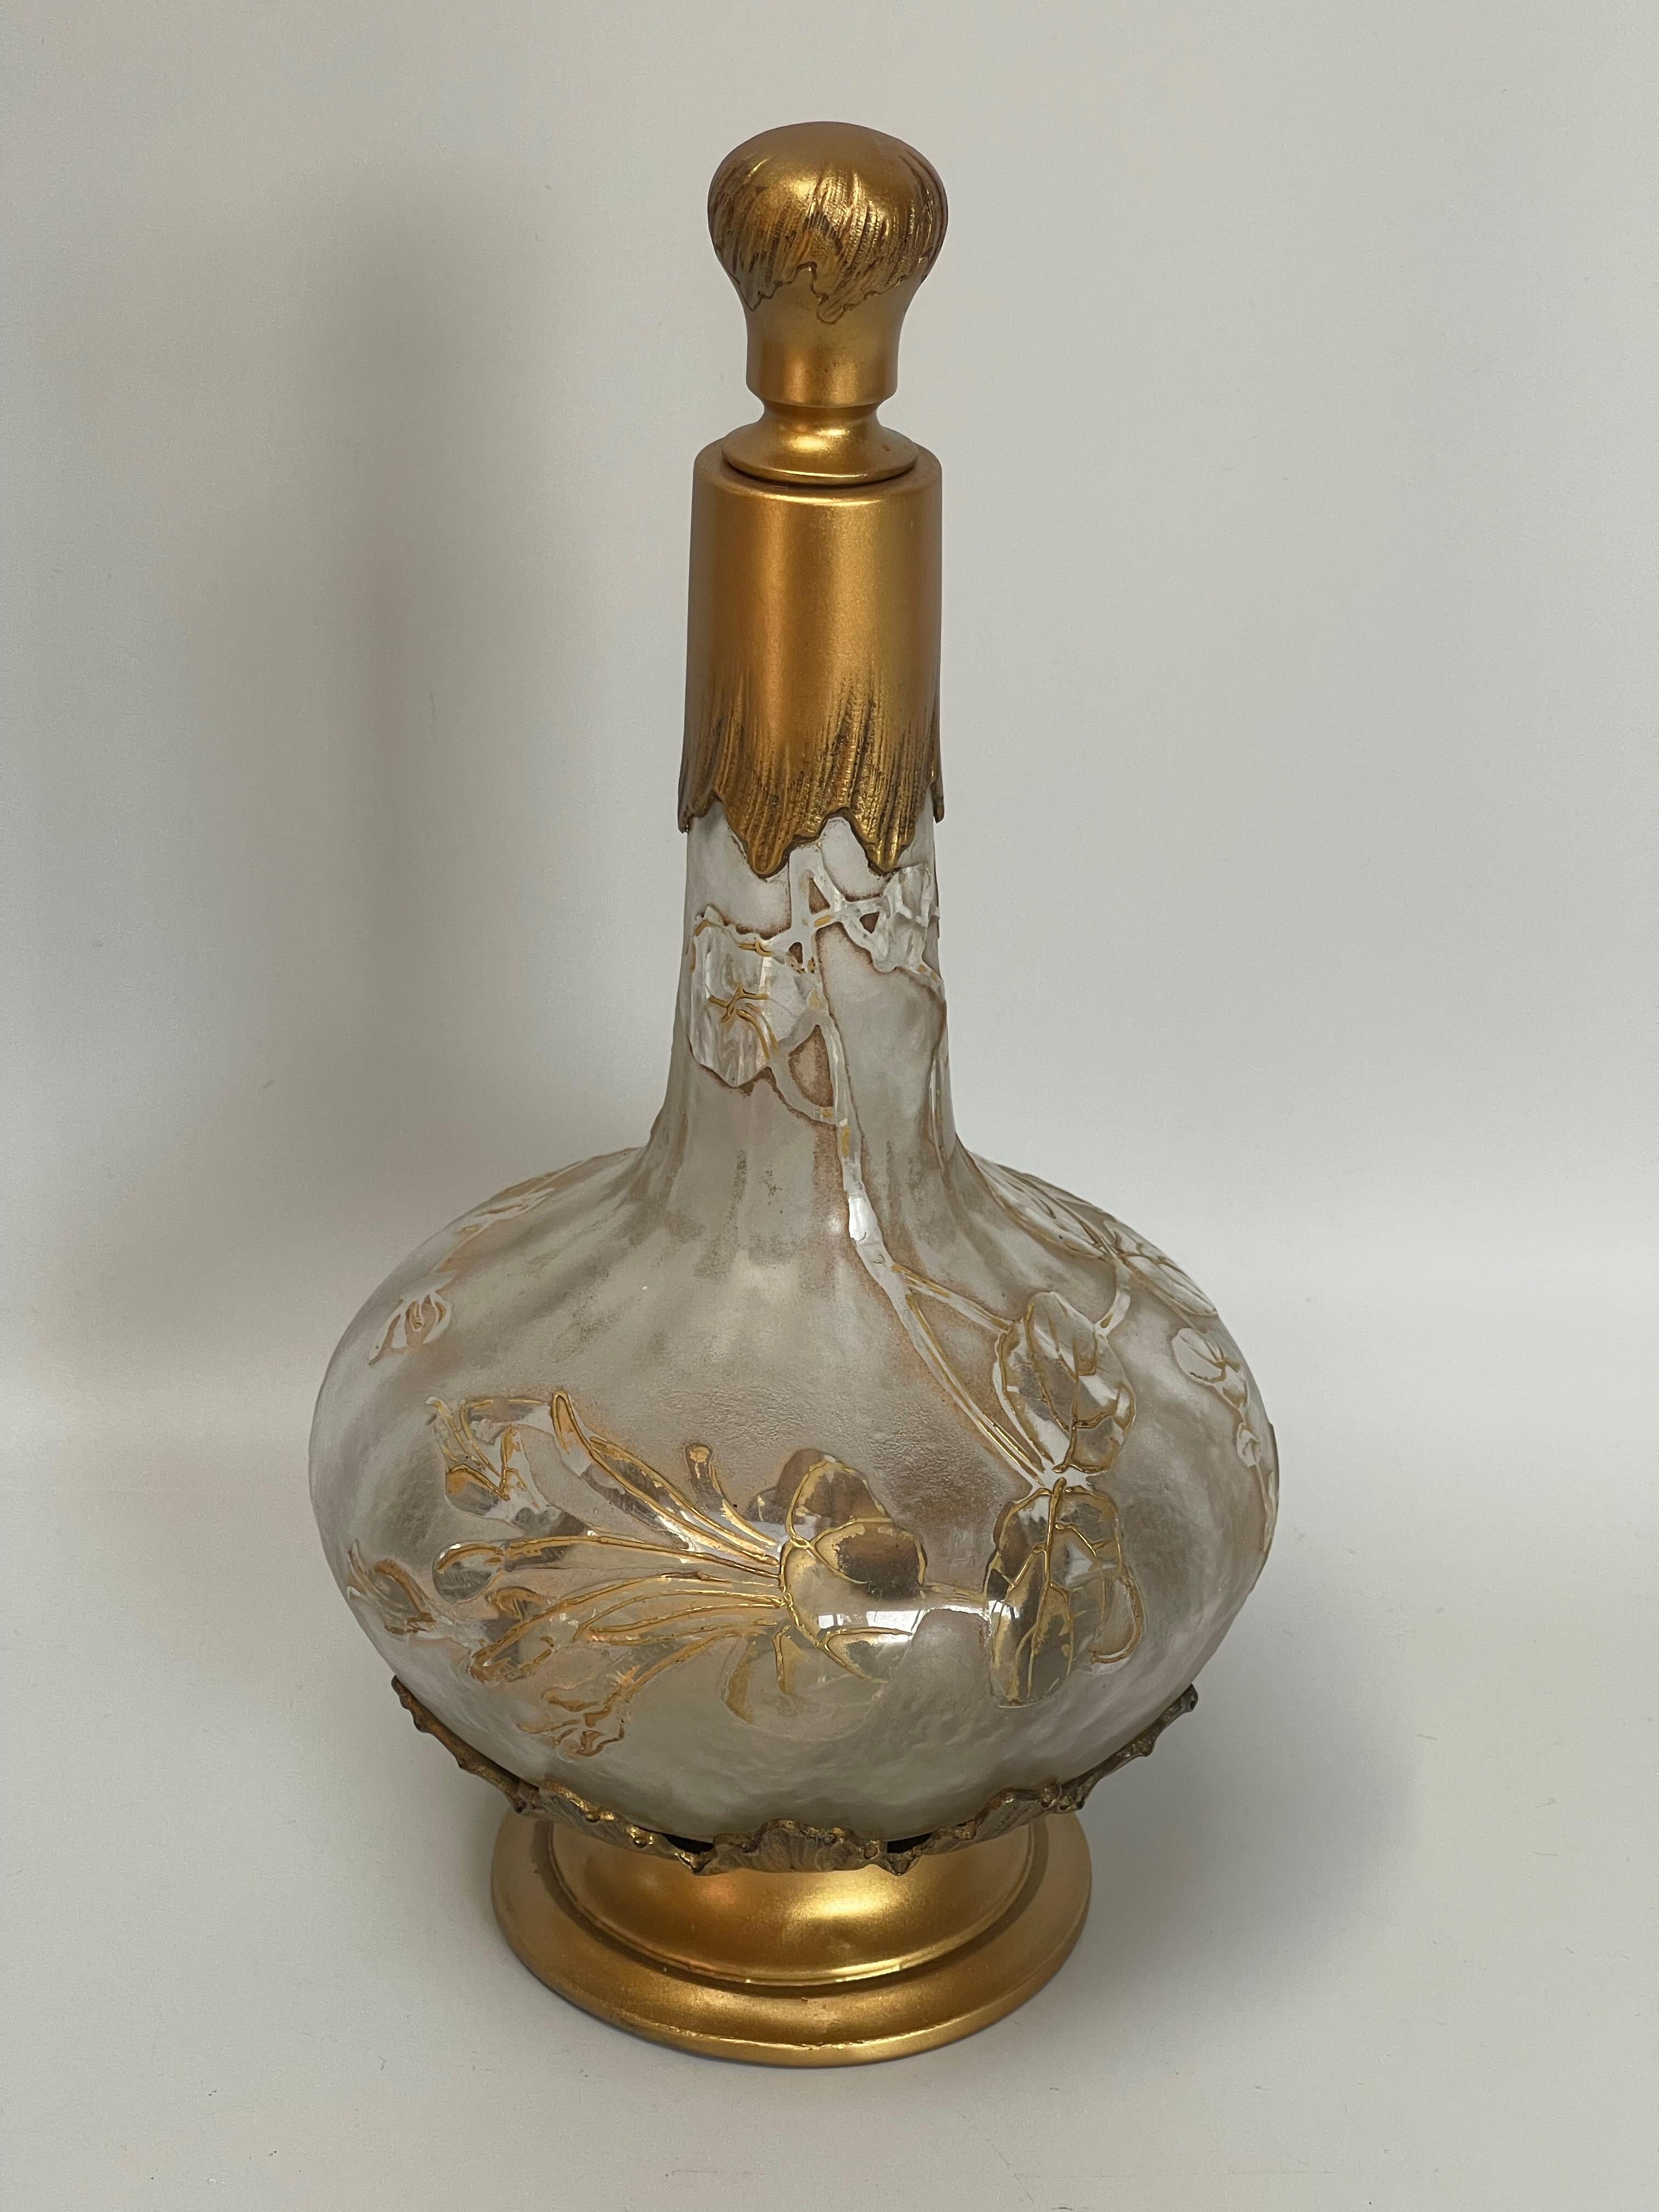 Decanter engraved with acid with floral decoration around 1900 attributed to Daum Nancy and Victor Saglier for the setting. Signature at the bottom of the carafe. Note a slight deformation on the foot.

Measures: Diameter: foot 8.7 cm
Height: